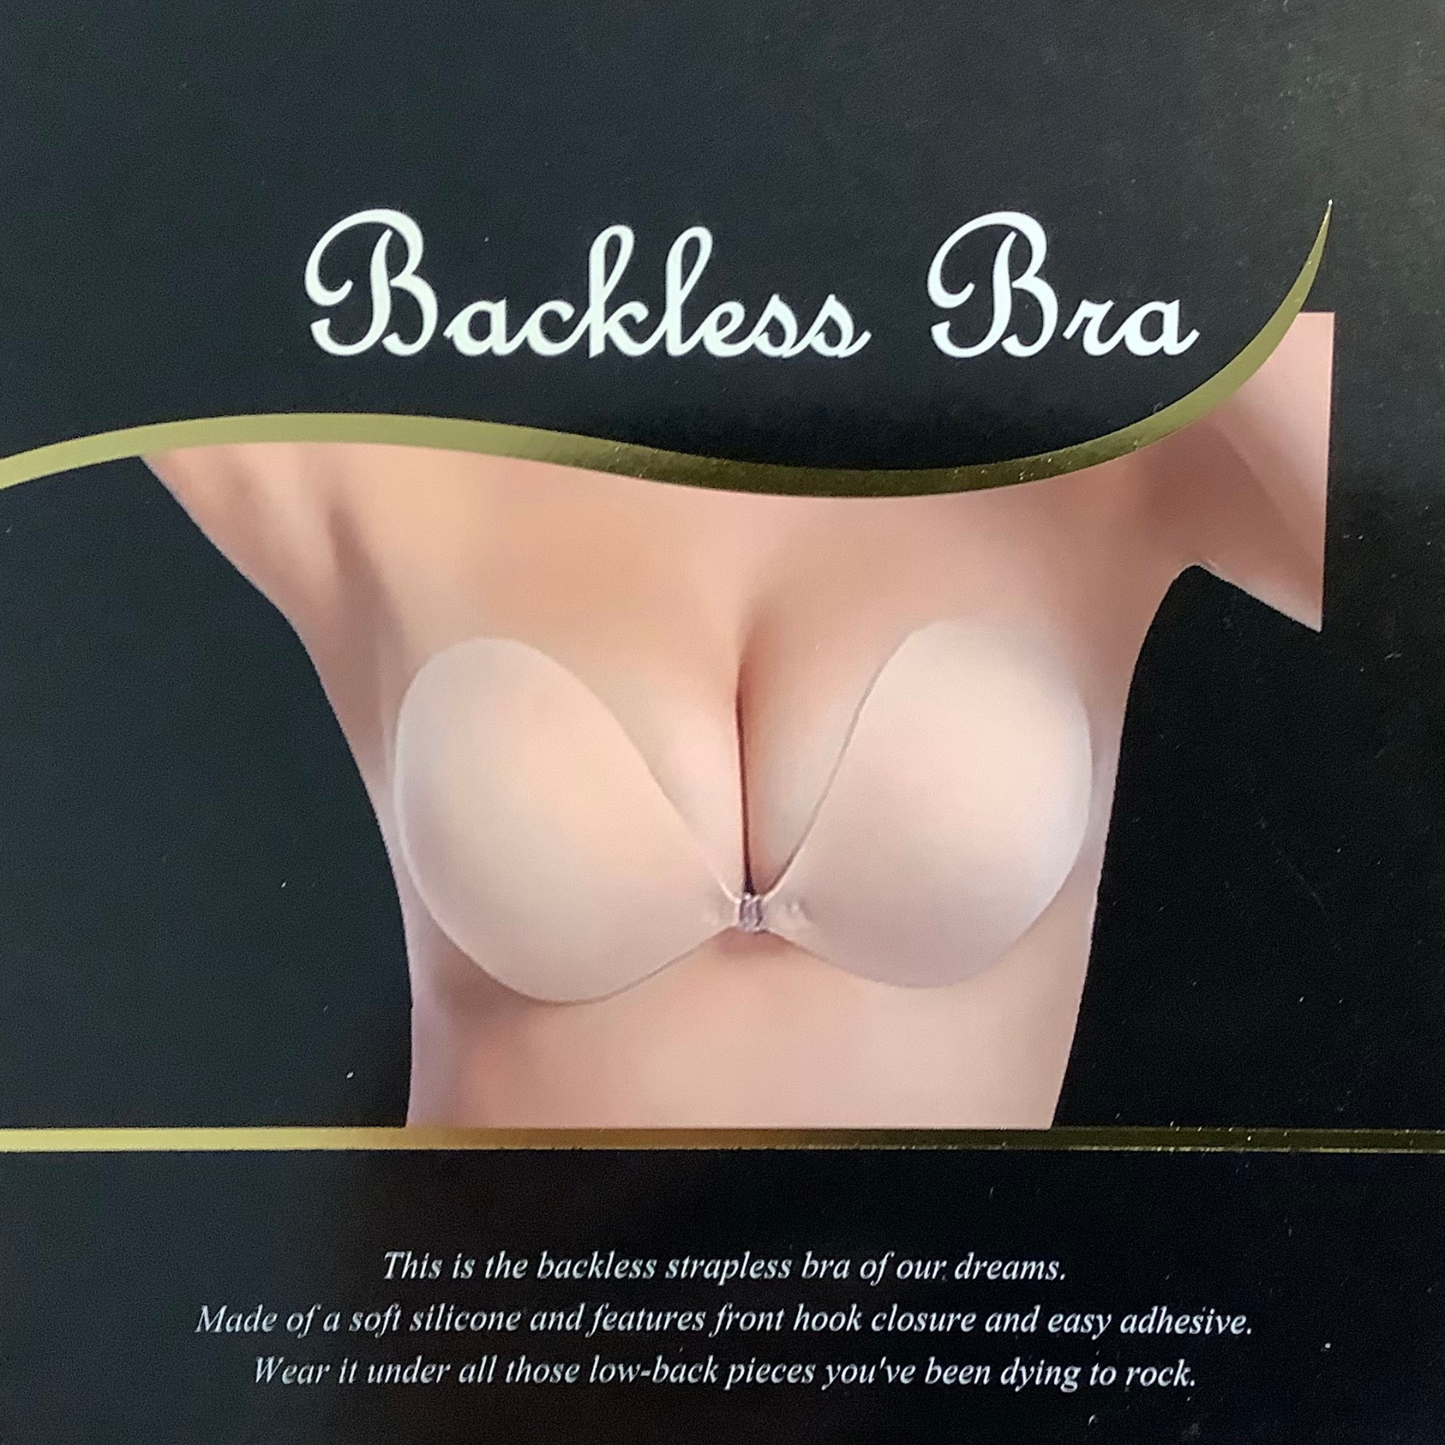 self adhesive backless bra. Available in nude or black